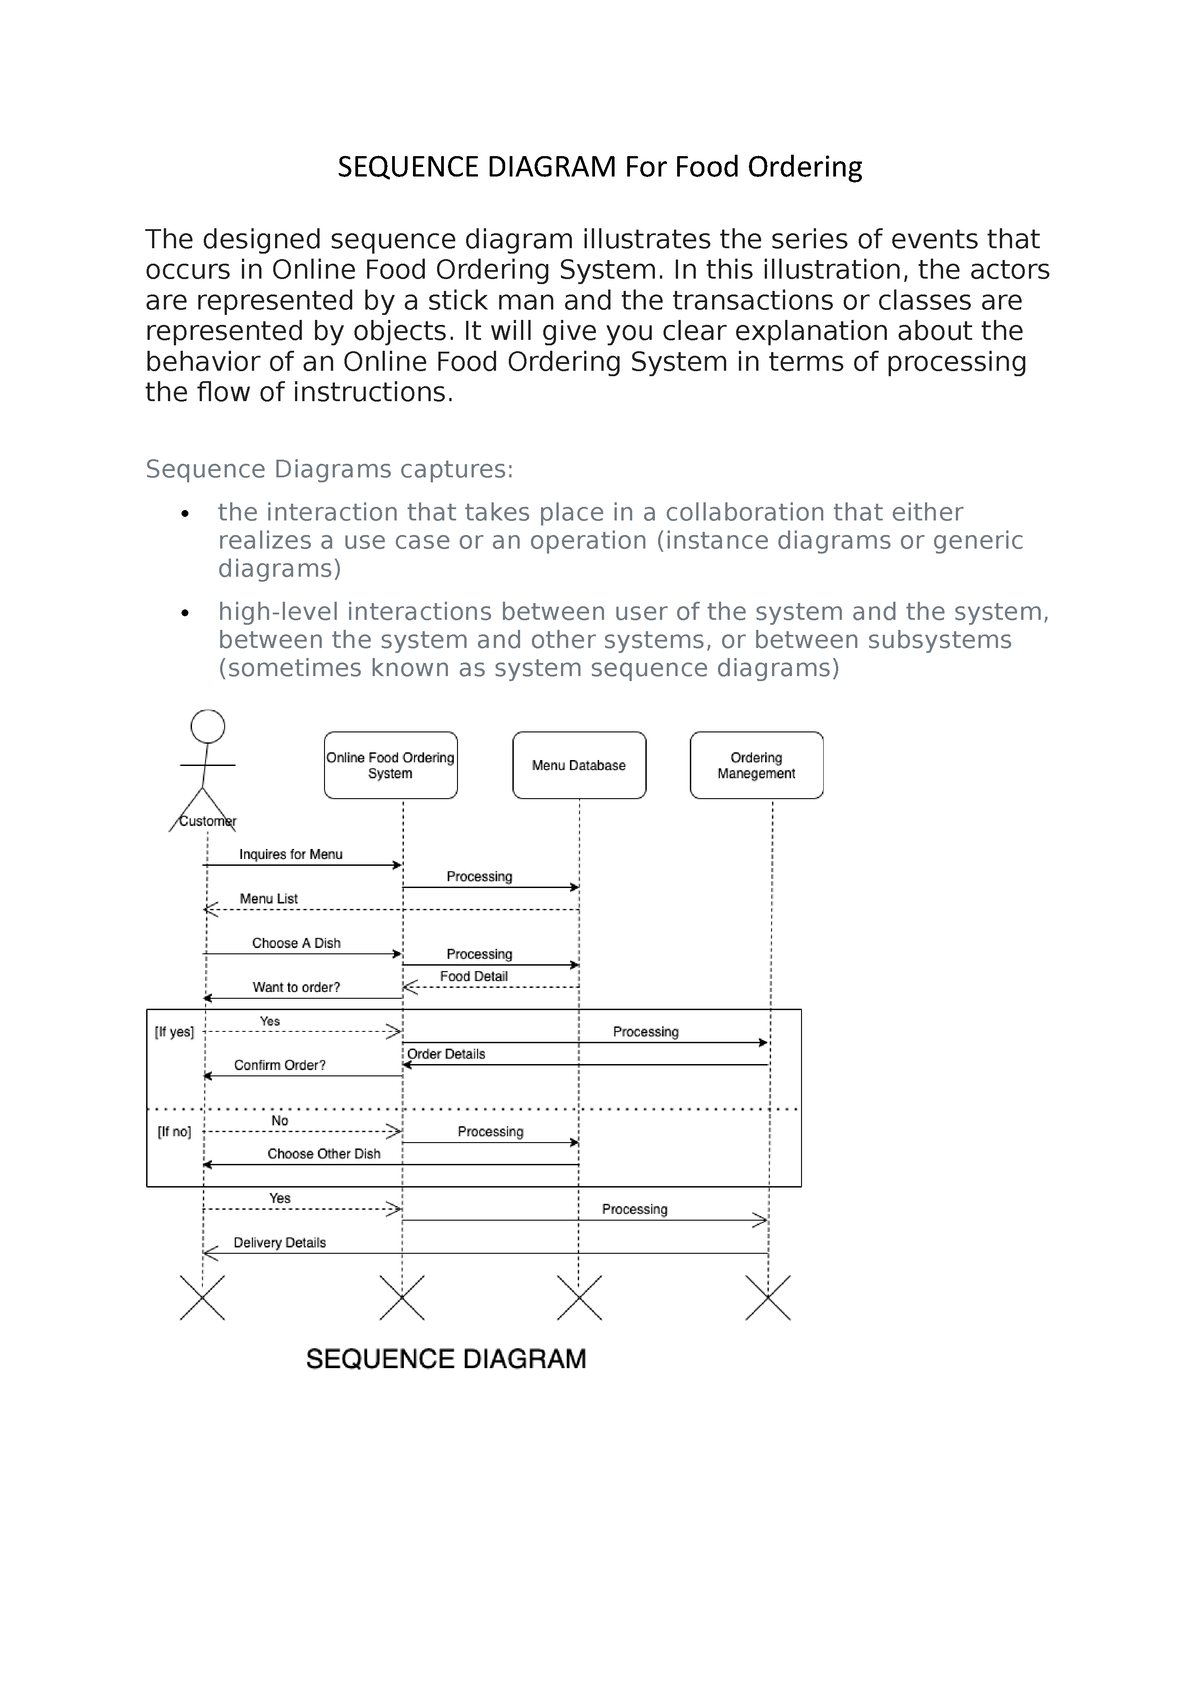 Sequence Diagram For Food Ordering Sequence Diagram For Food Ordering The Designed Sequence 0984